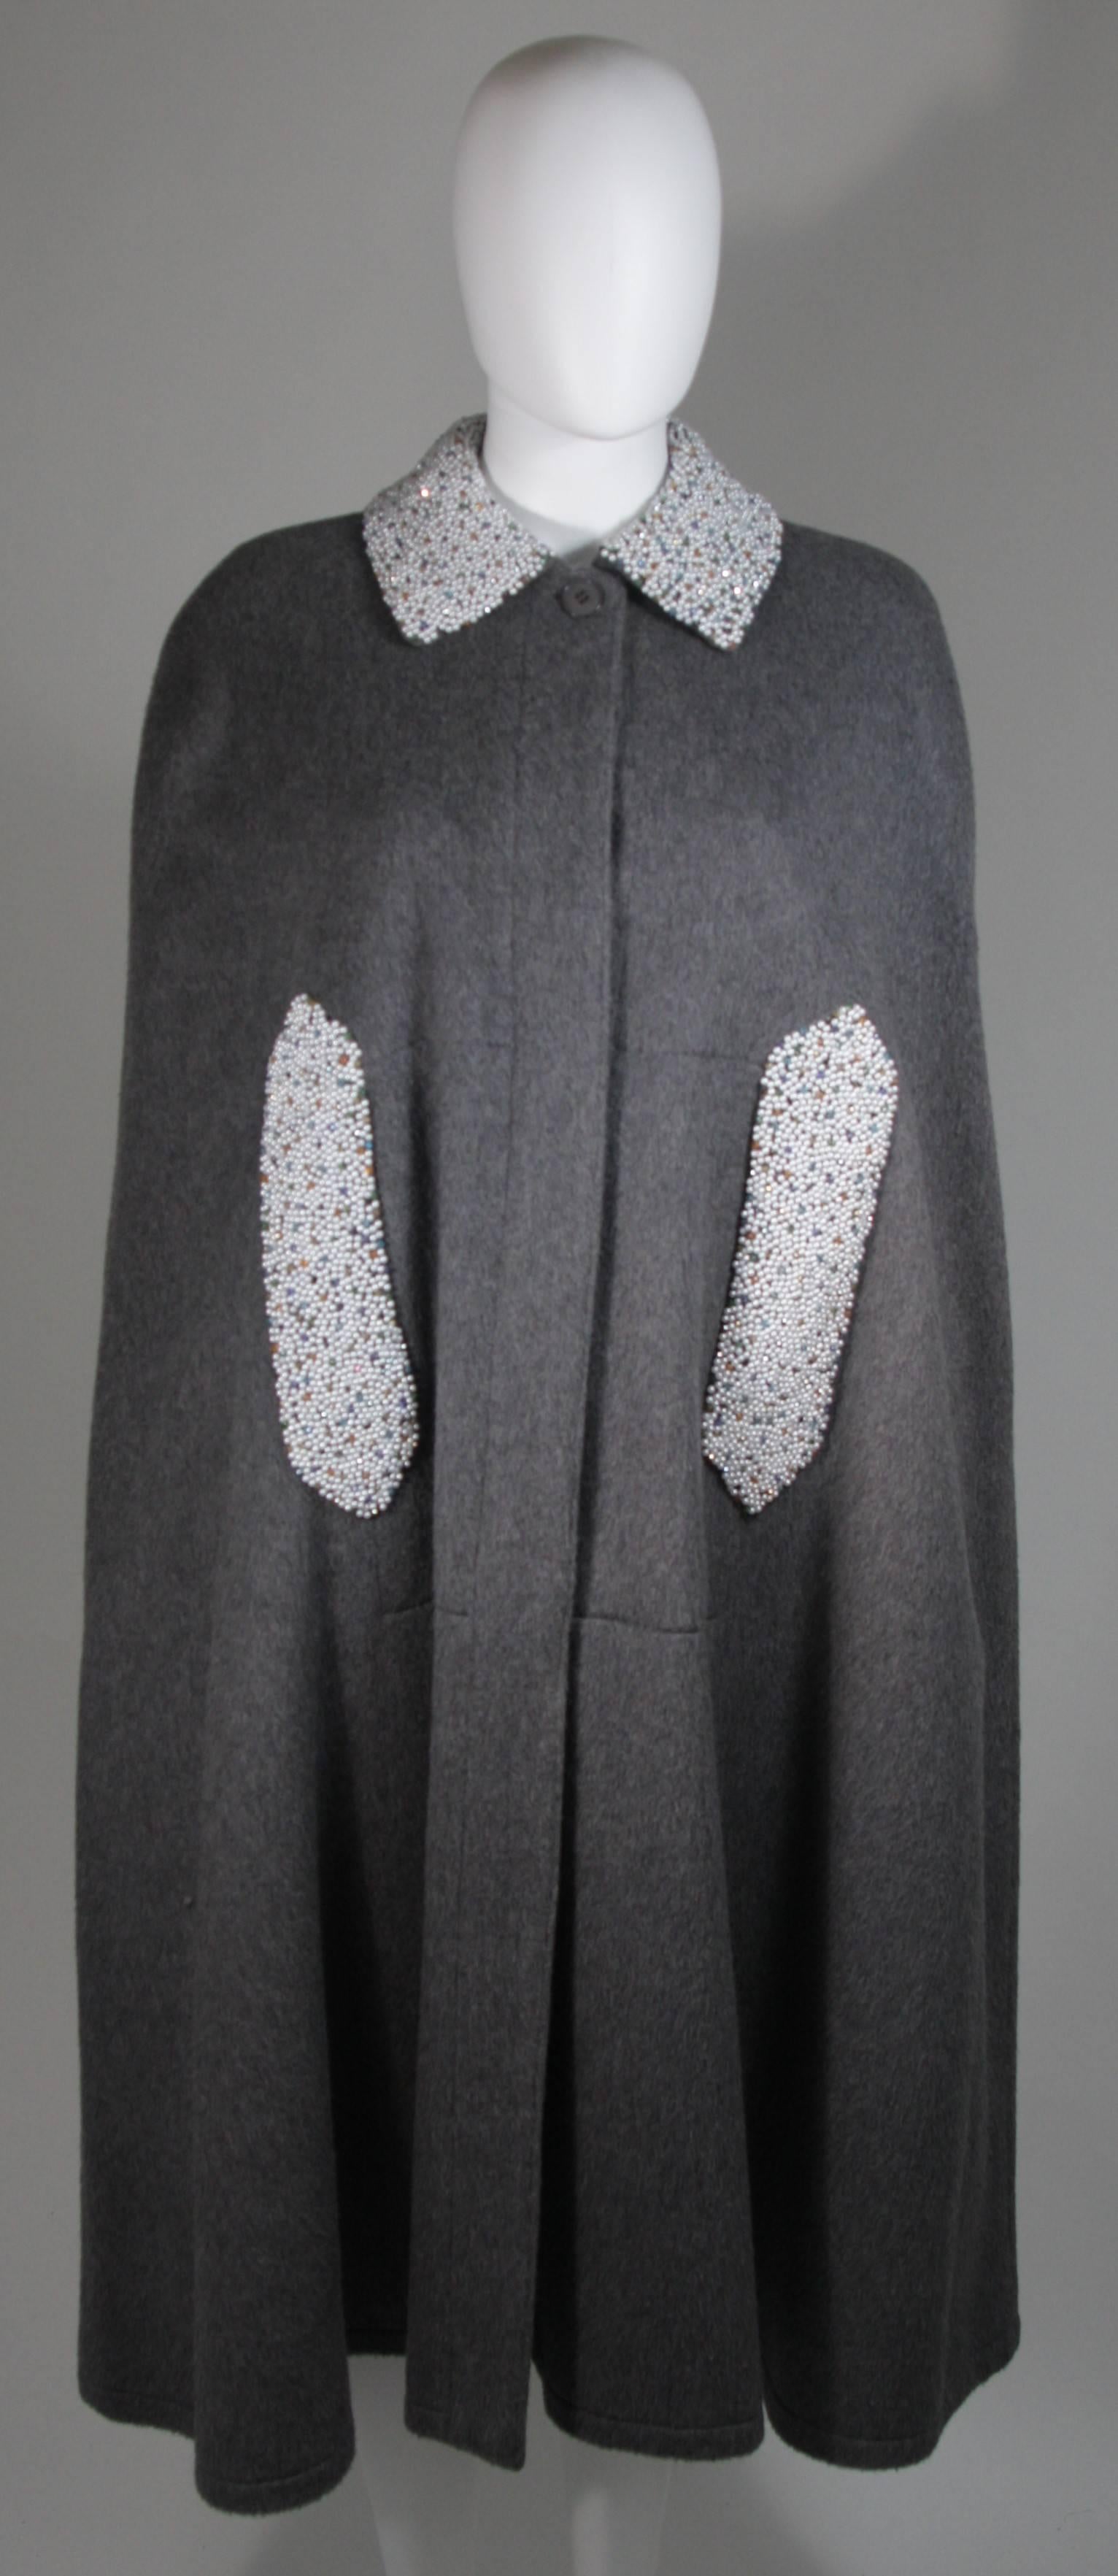  This cape is composed of a grey wool. The cape is a vintage design with a modern twist, the pearl and rhinestone beading at the pockets are a modern addition by 'Vutique'. The cloak has front button closures. In excellent vintage condition. 

 